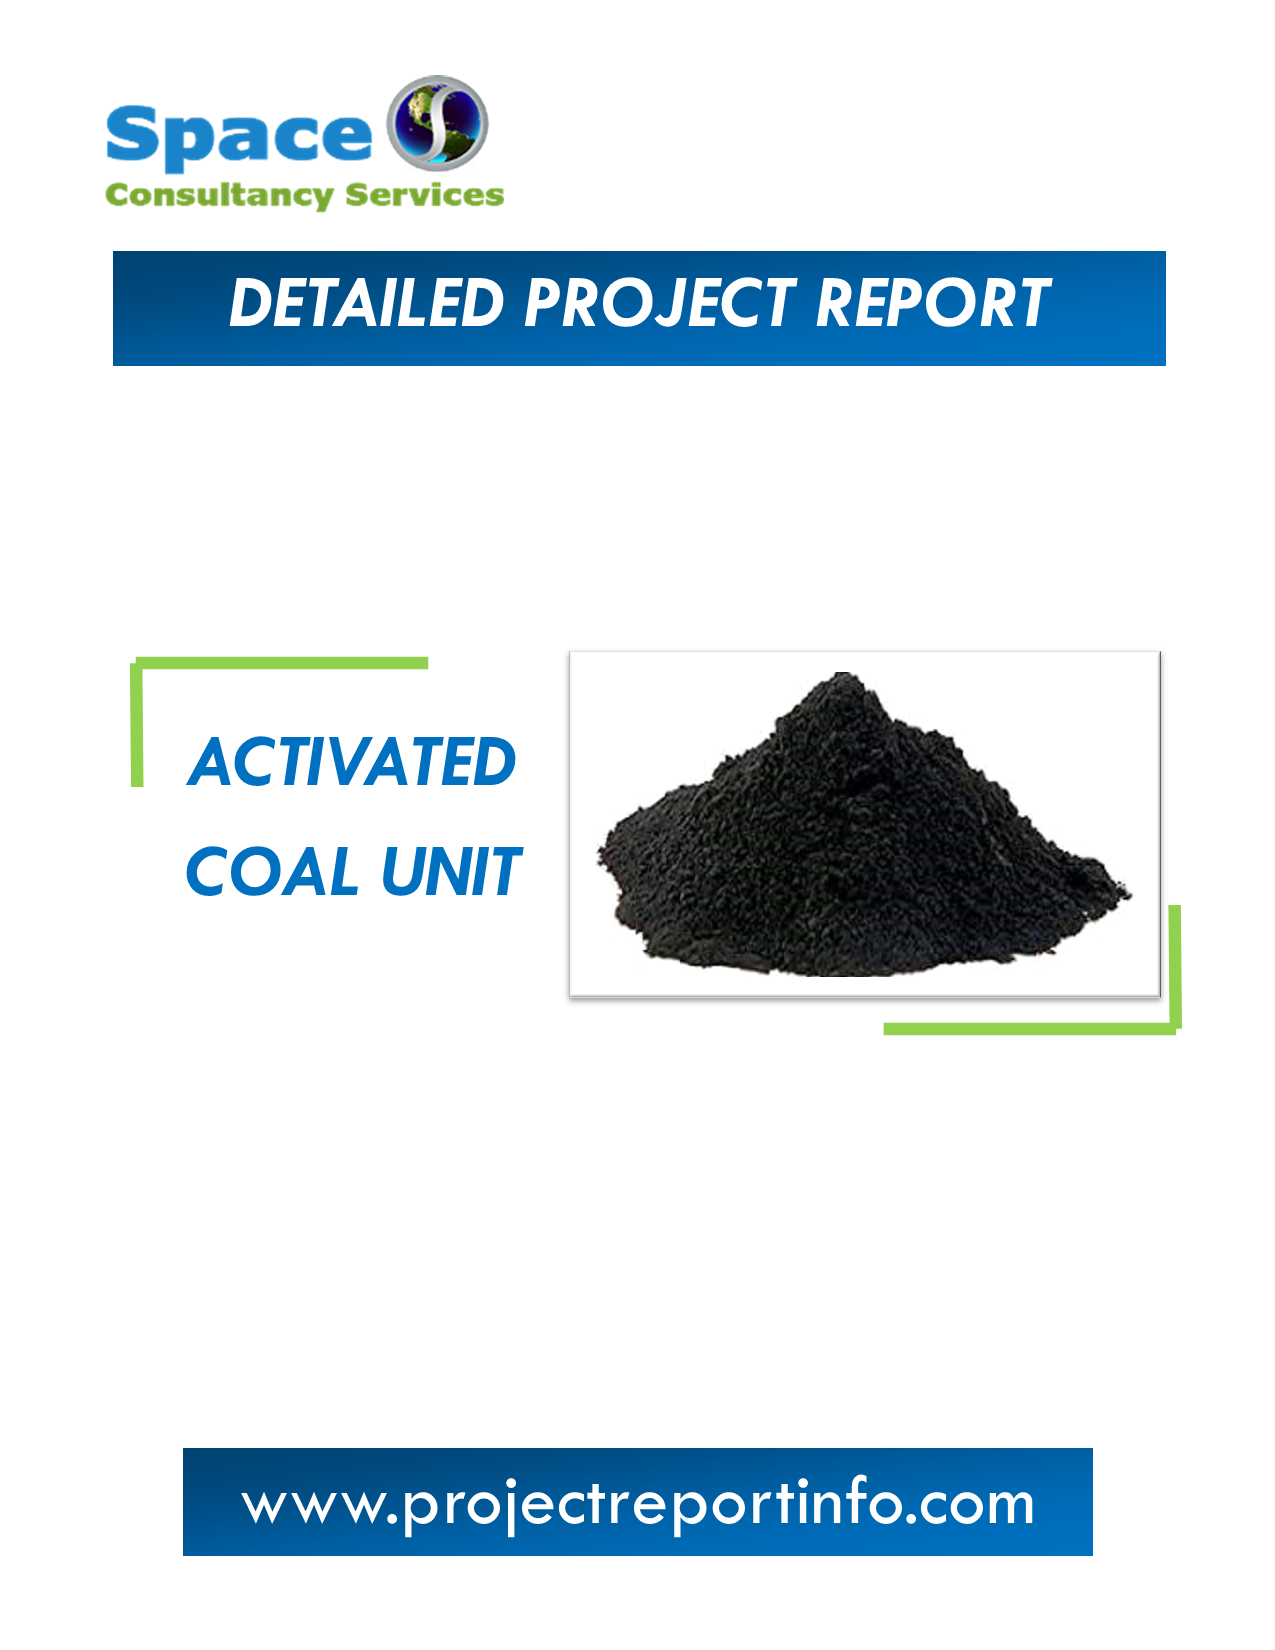 Project Report on Activated Coal Unit